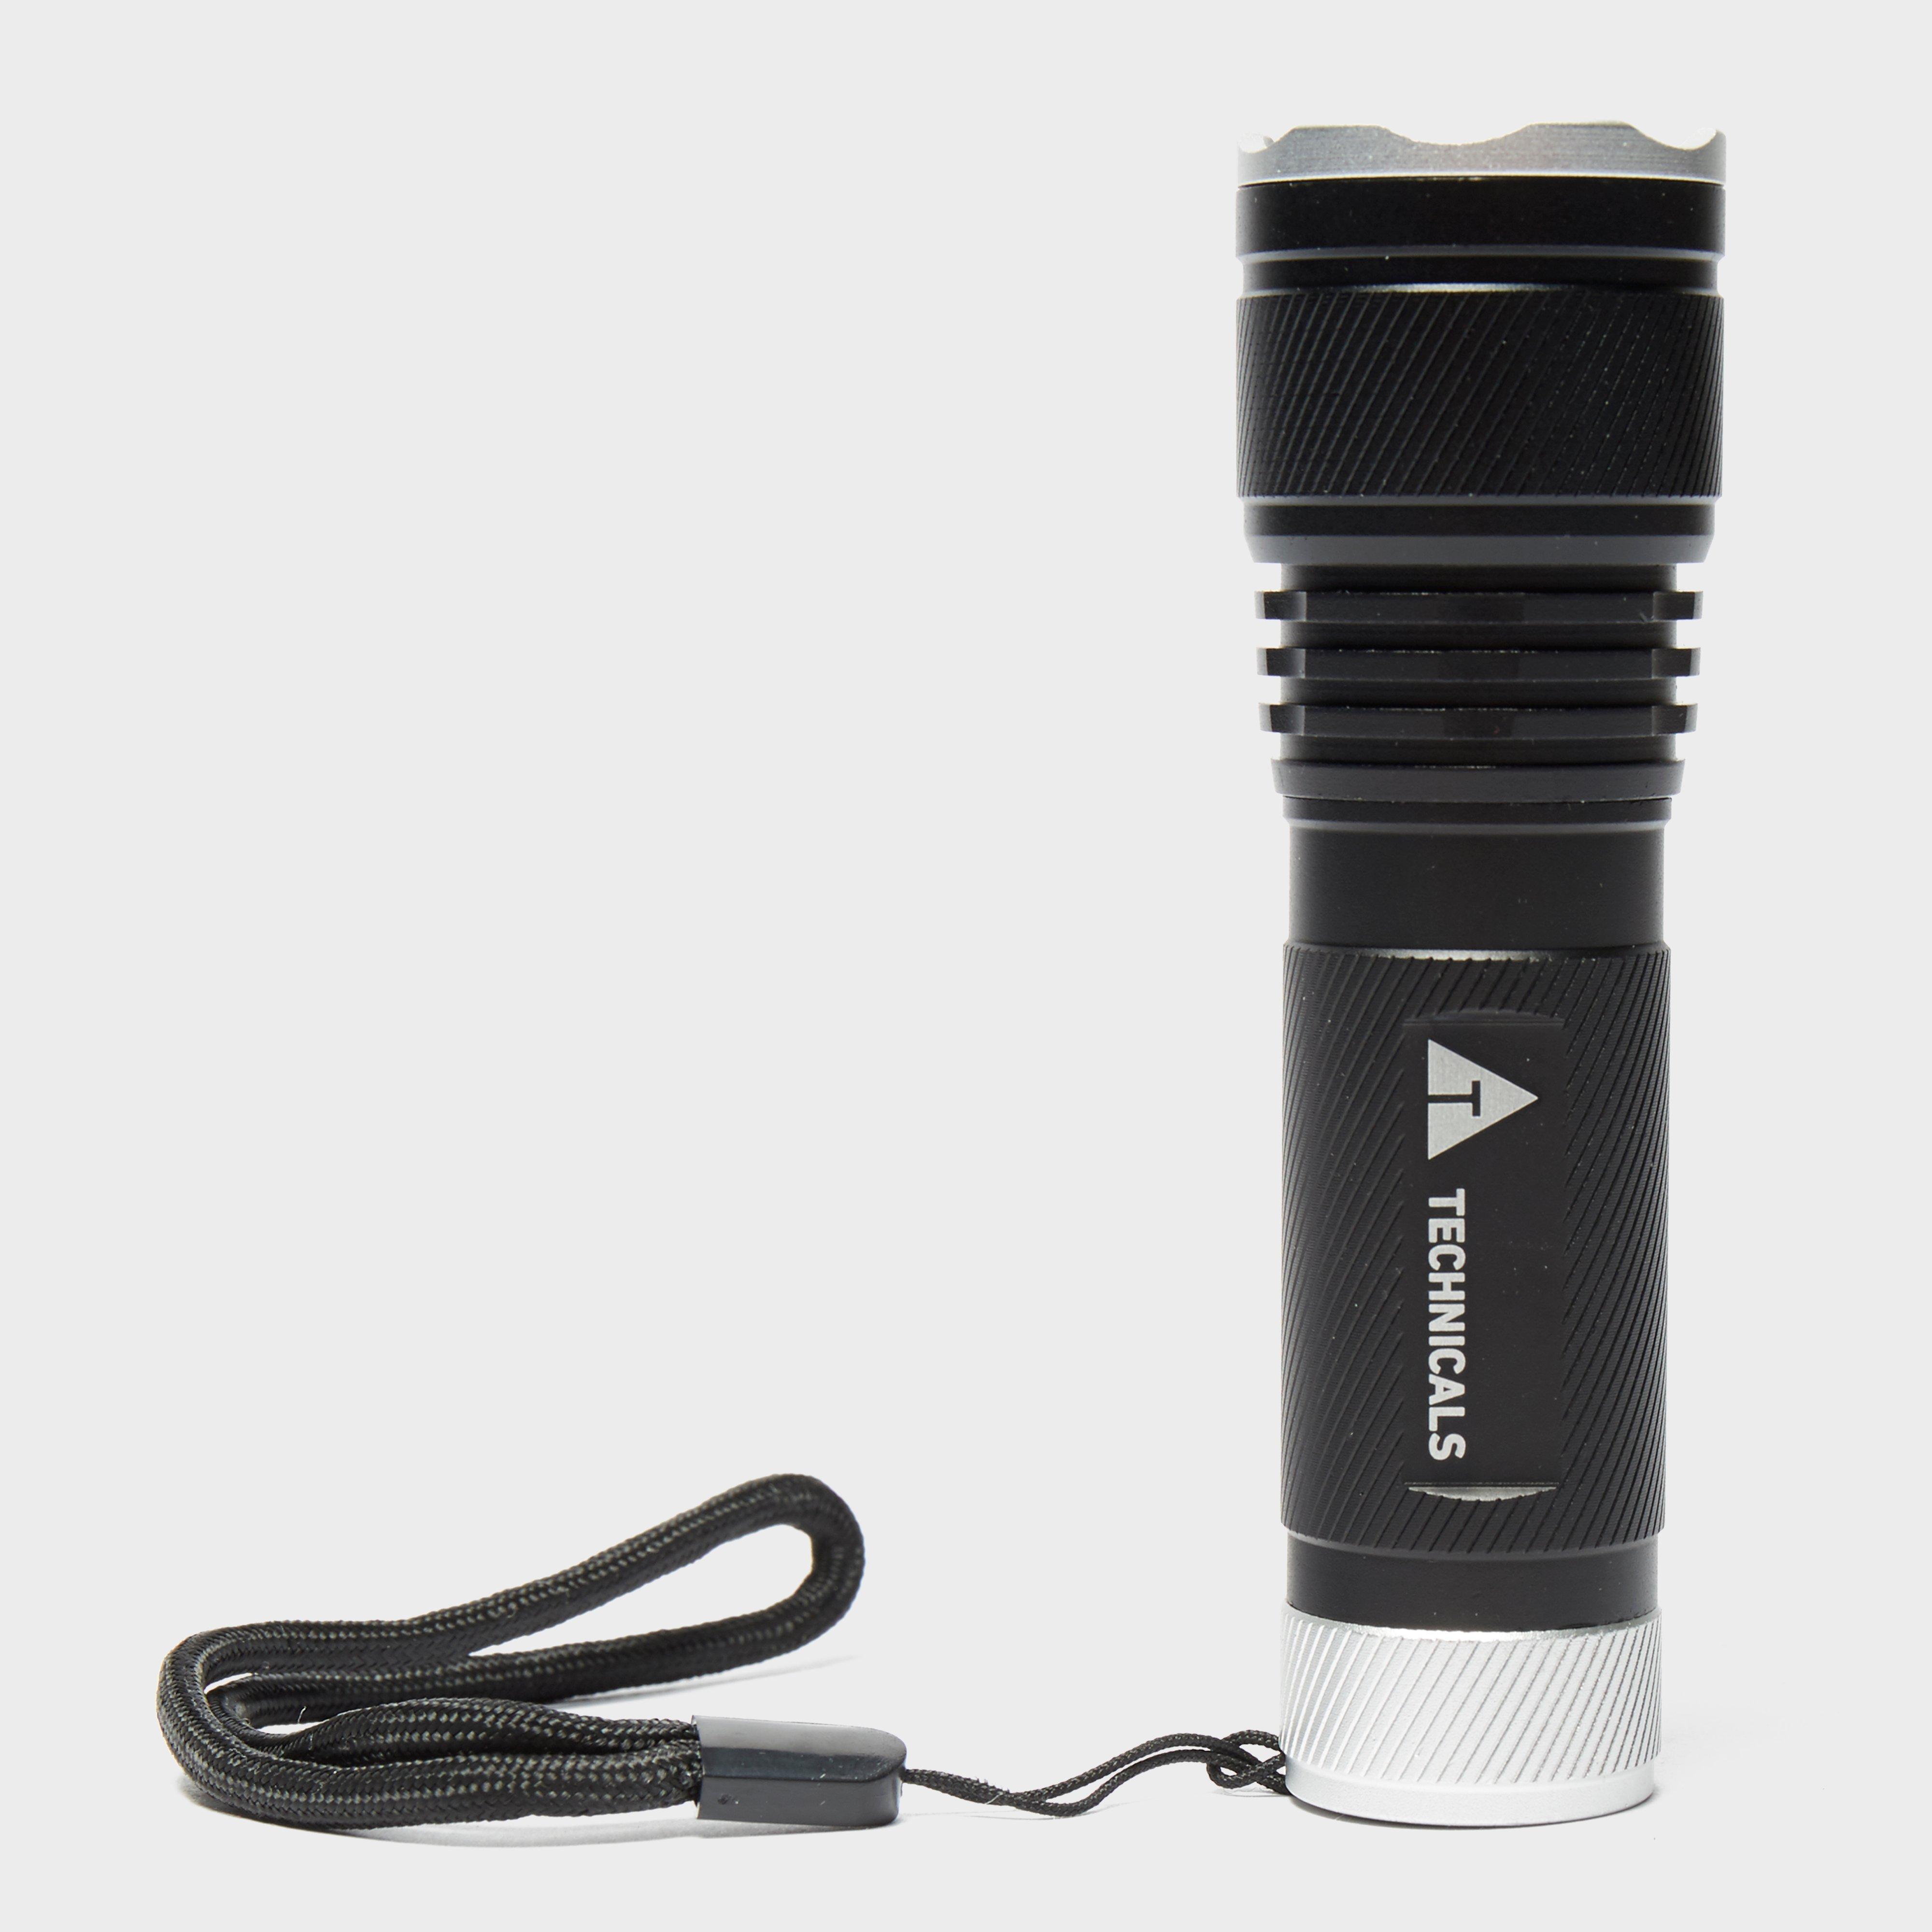 Technicals 300 Lumen CREE Torch Review